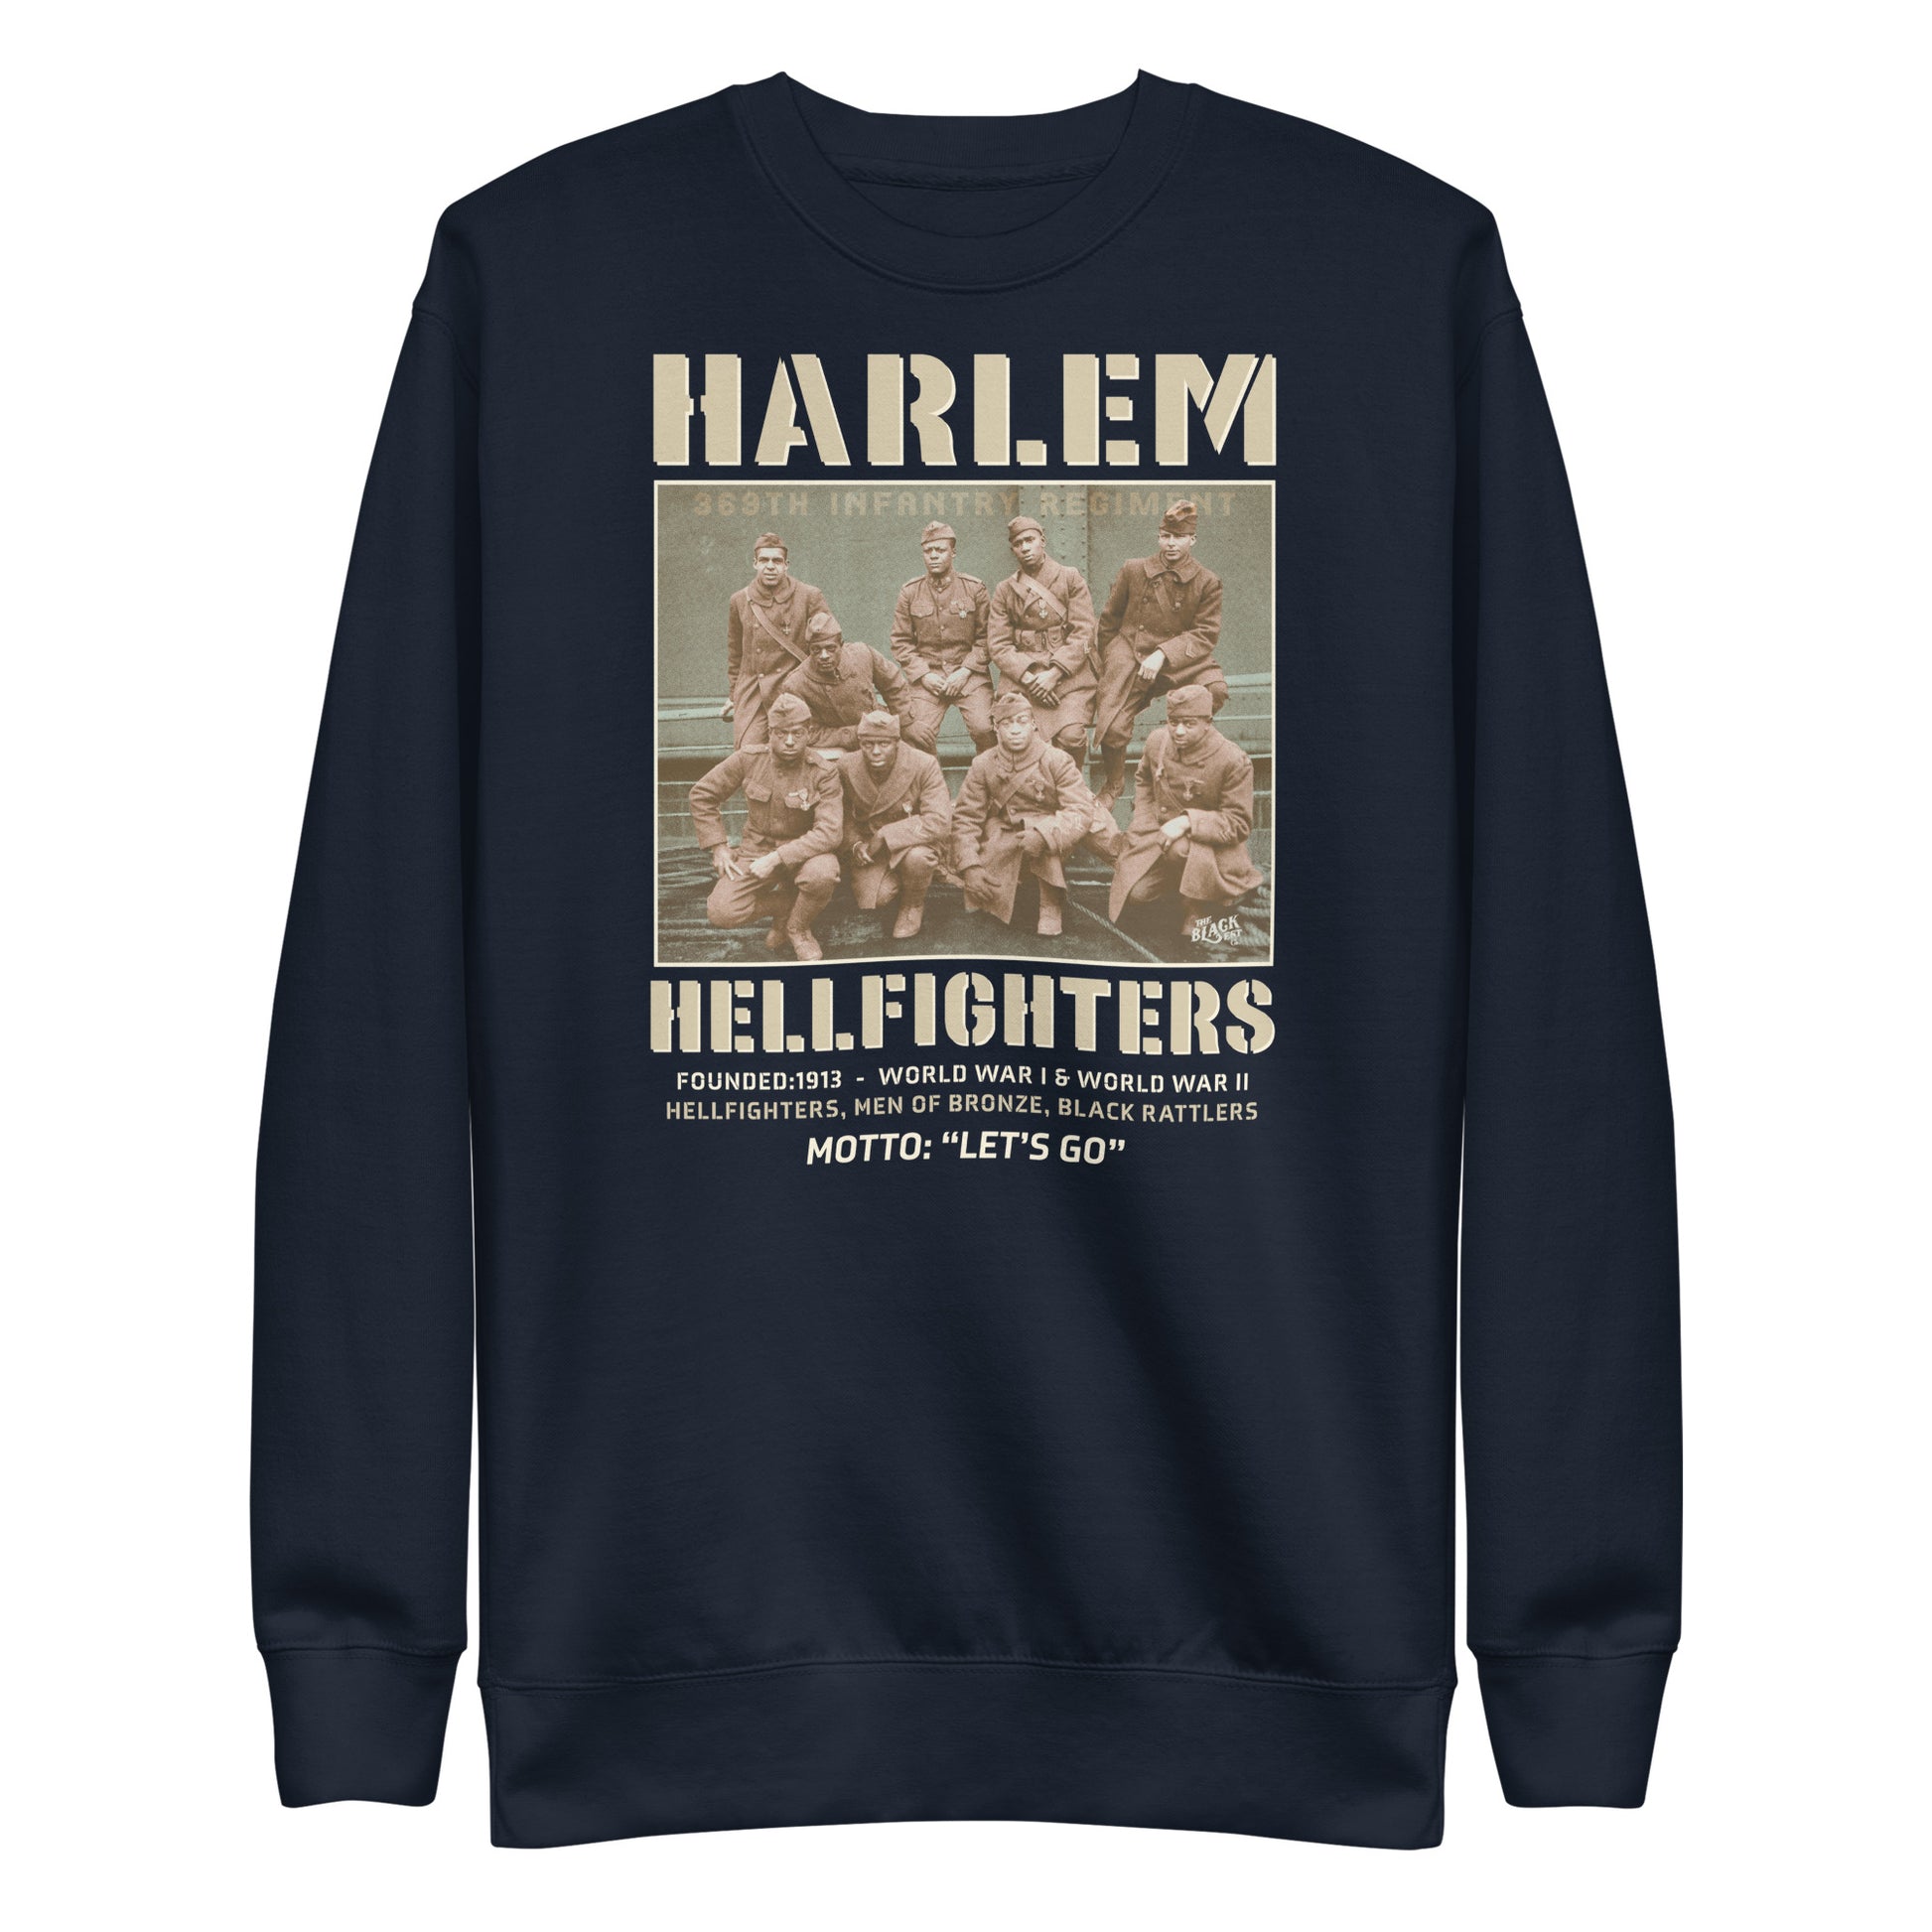 navy premium sweatshirt with a vintage image of wwi soldiers with text that reads harlem hellfighters